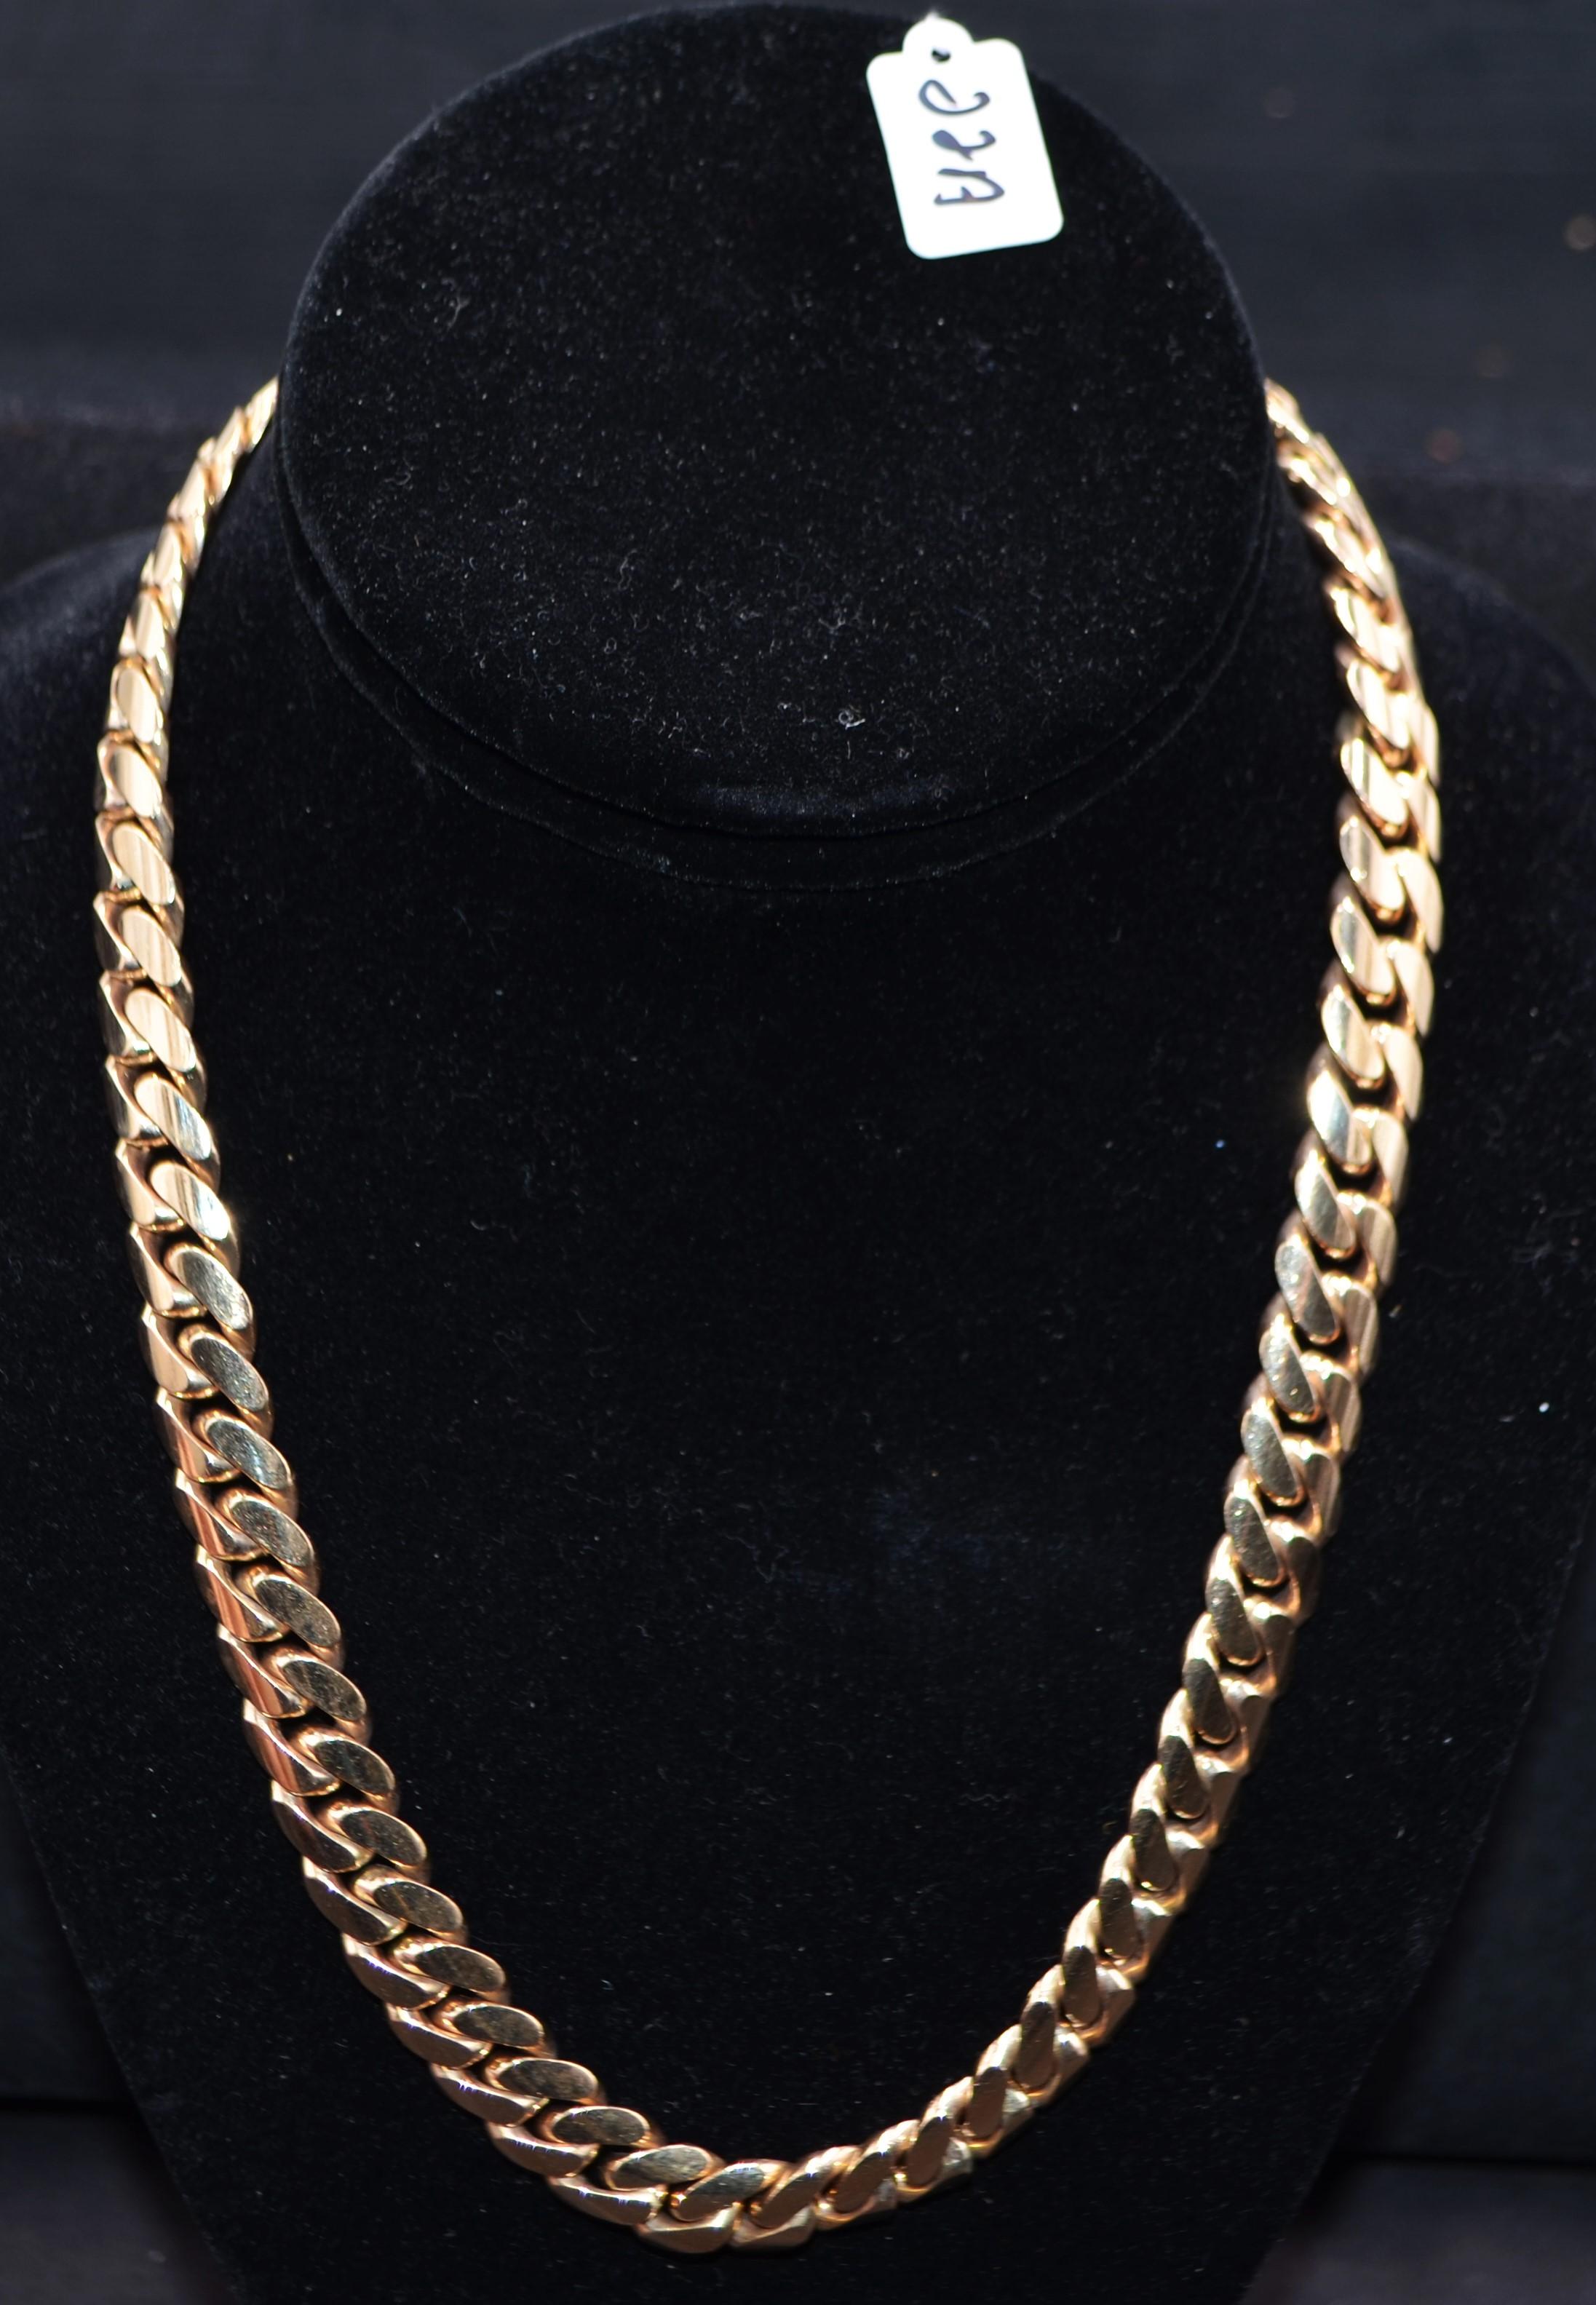 19 1/2 INCH 14K YELLOW GOLD SOLID LINK NECKLACE